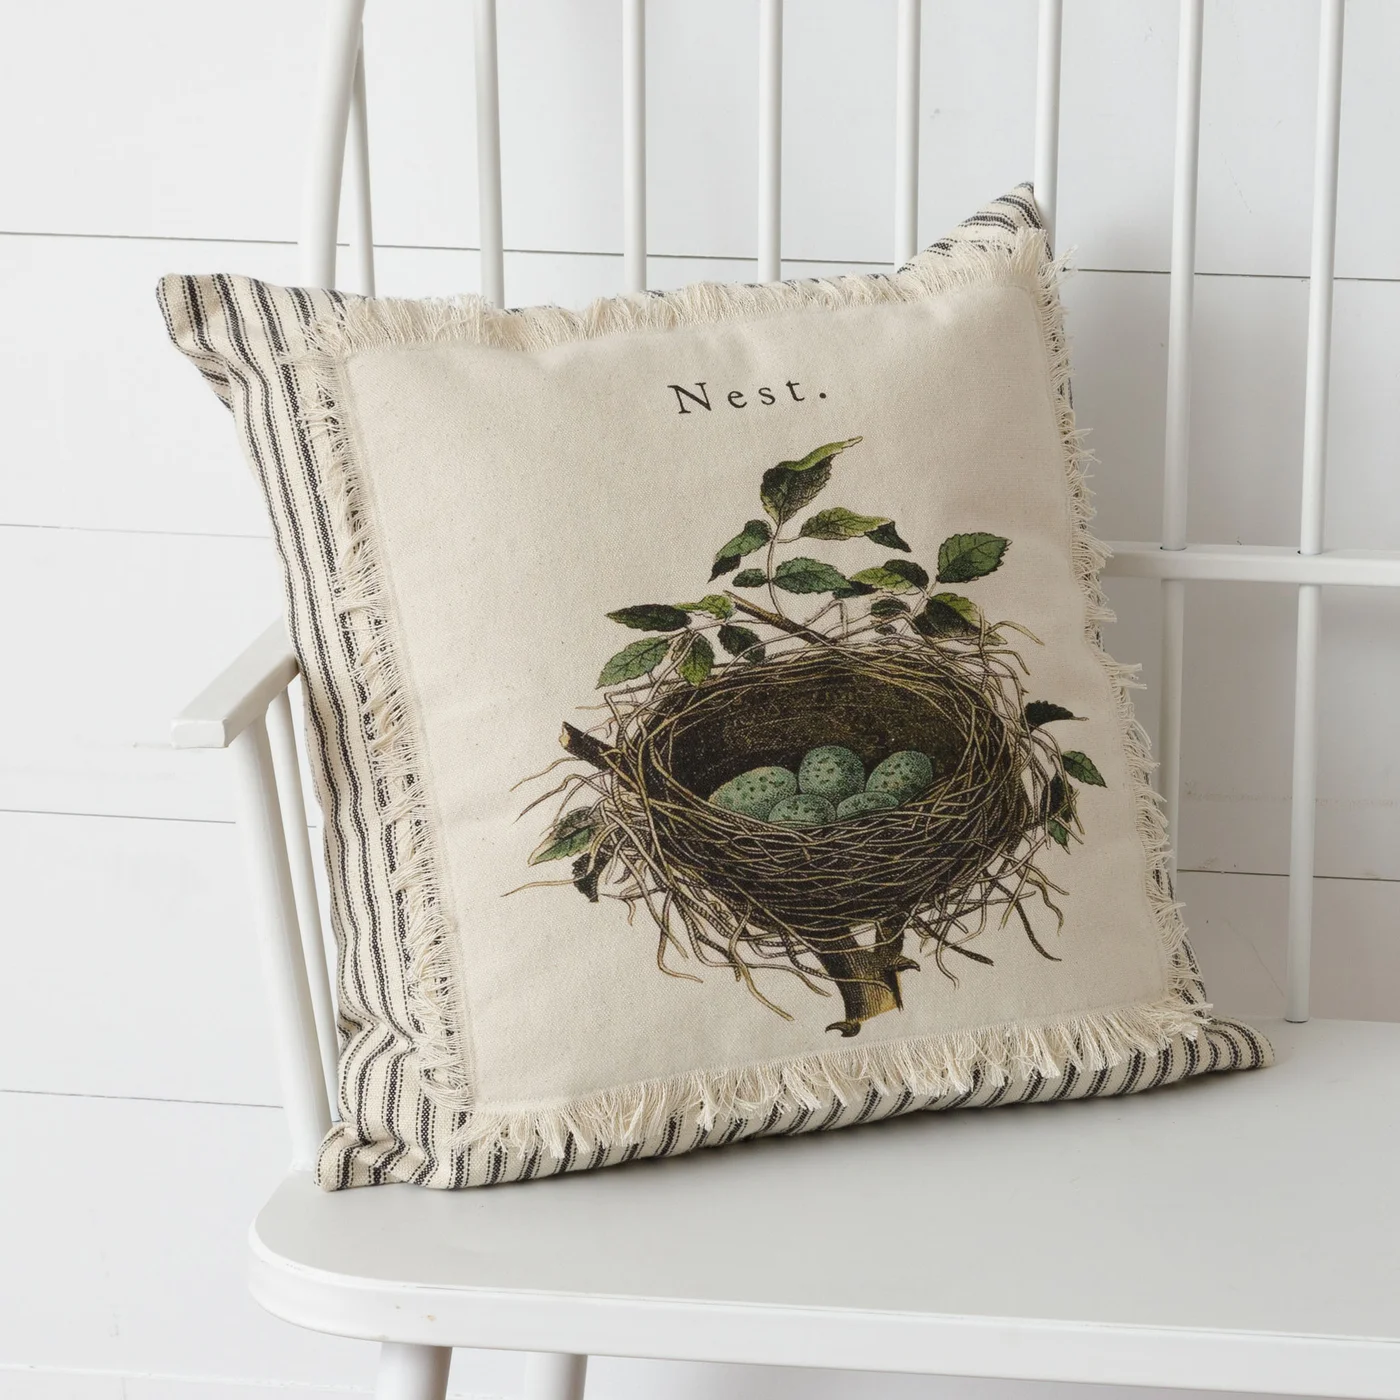 Natural-Style Nest and Eggs 17" Accent Pillow